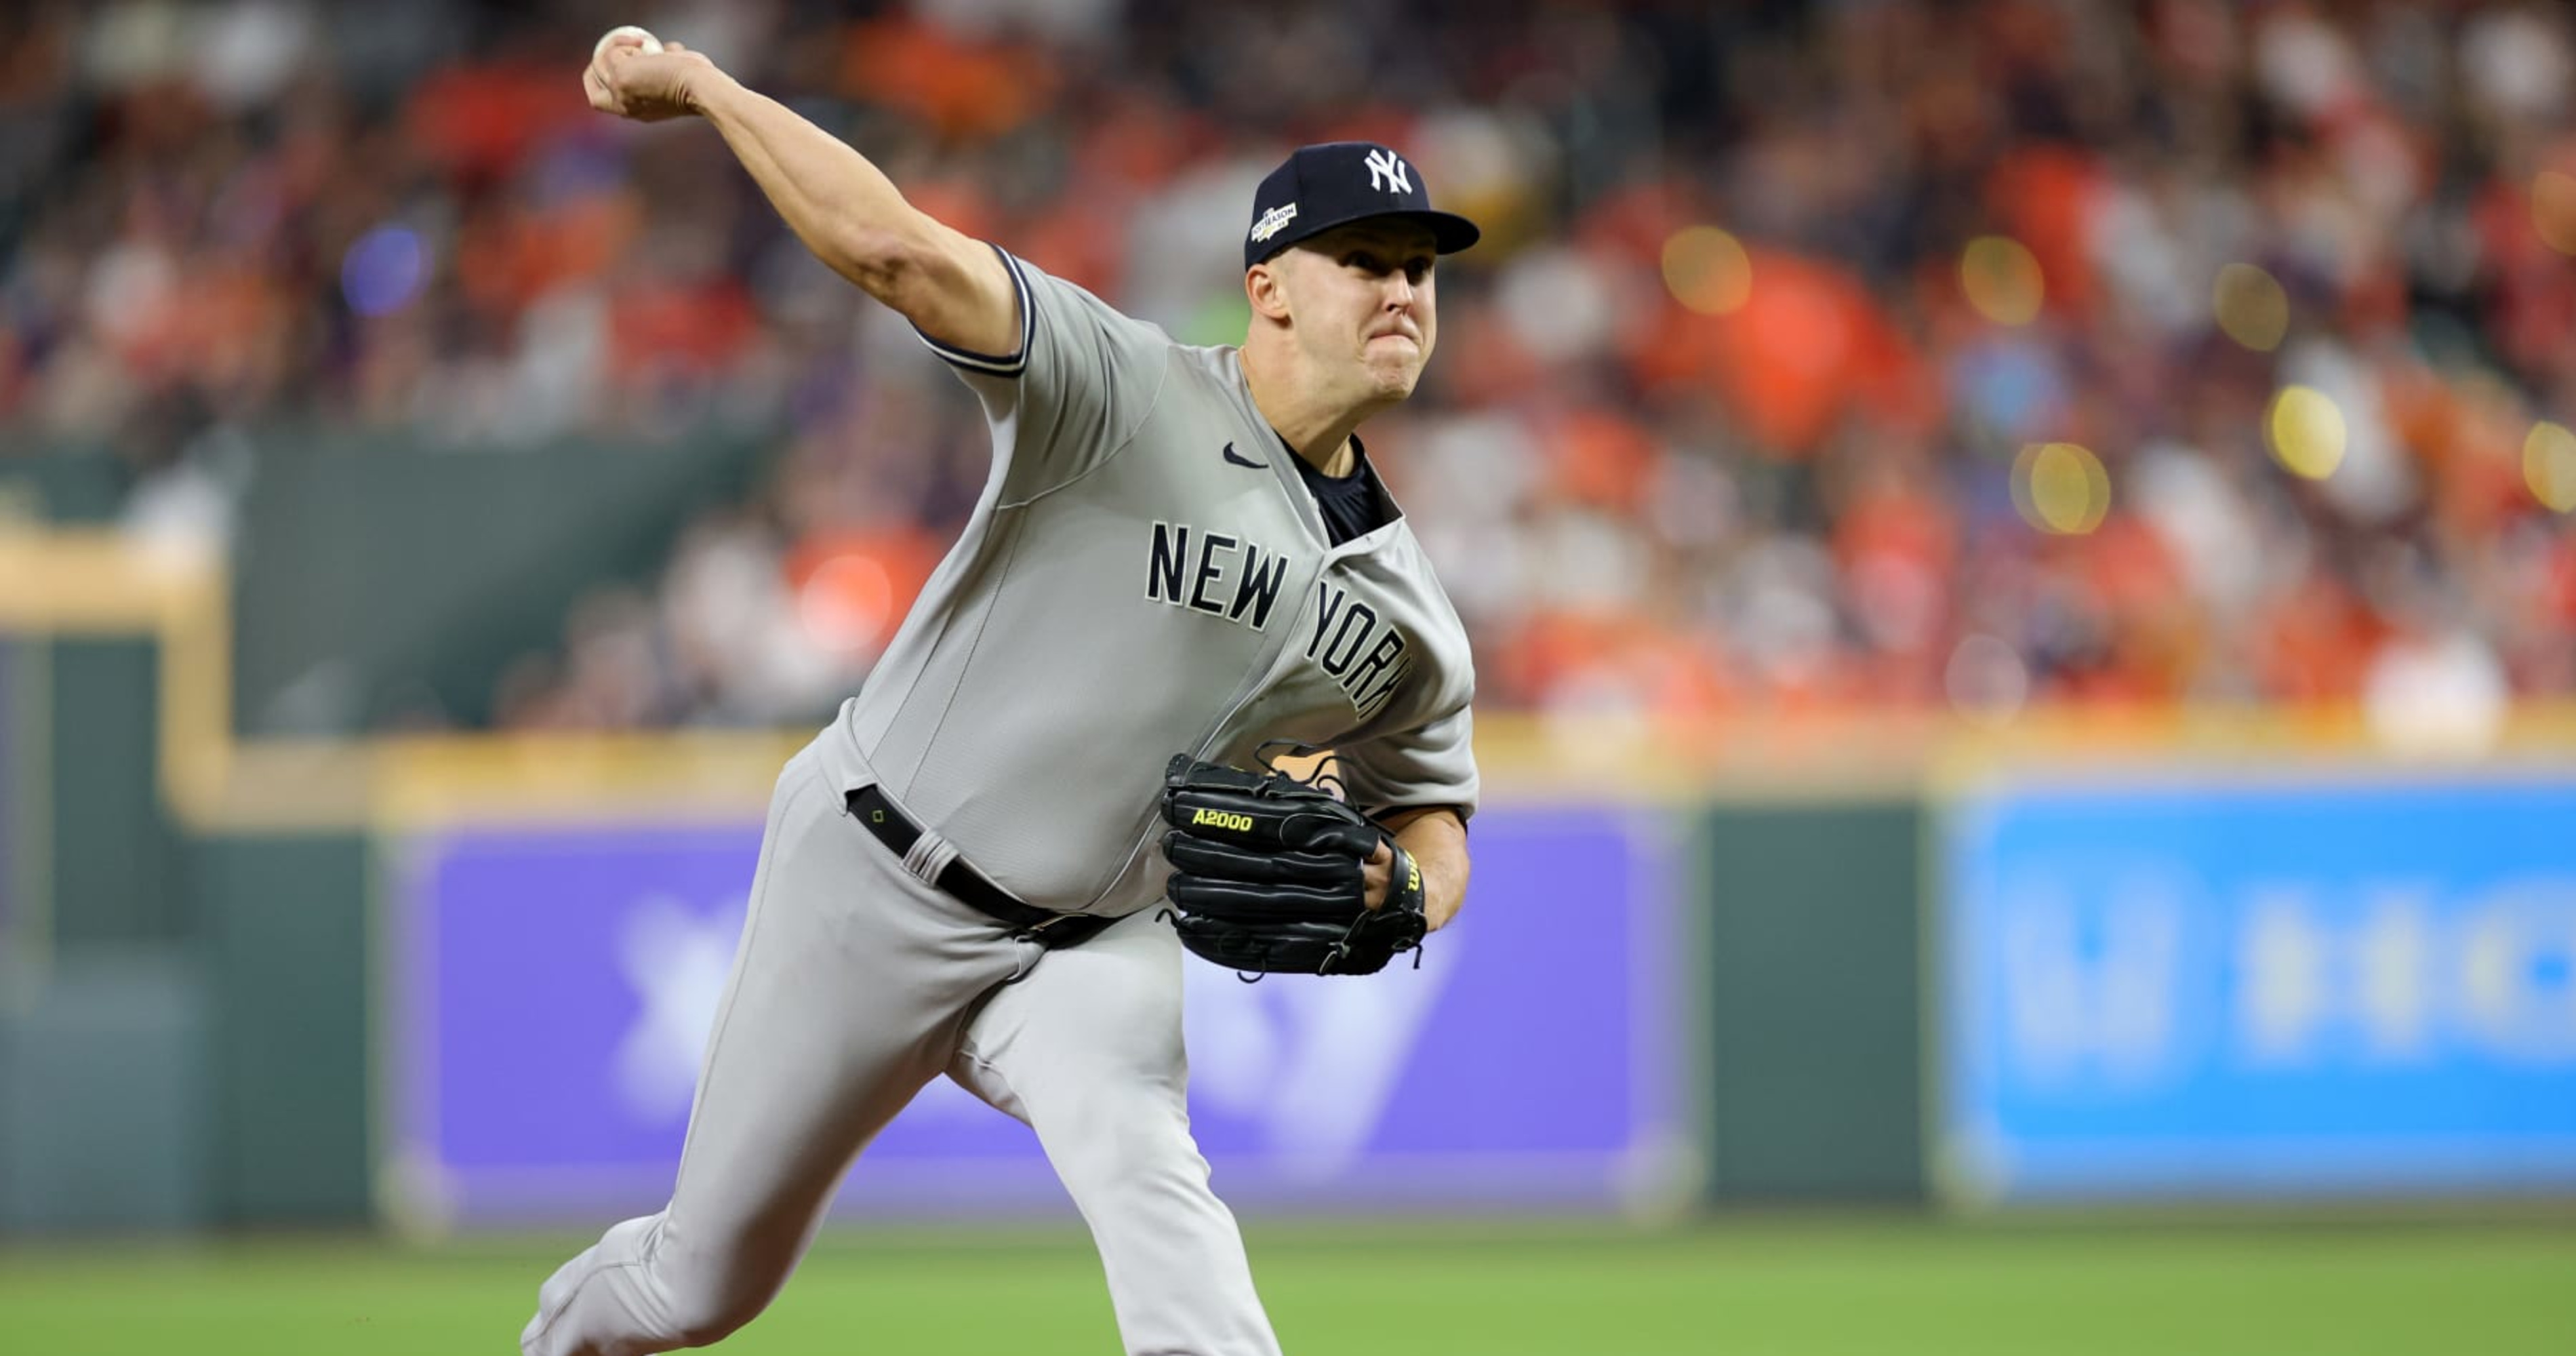 MLB Transaction News: Yankees trade for Jameson Taillon - Over the